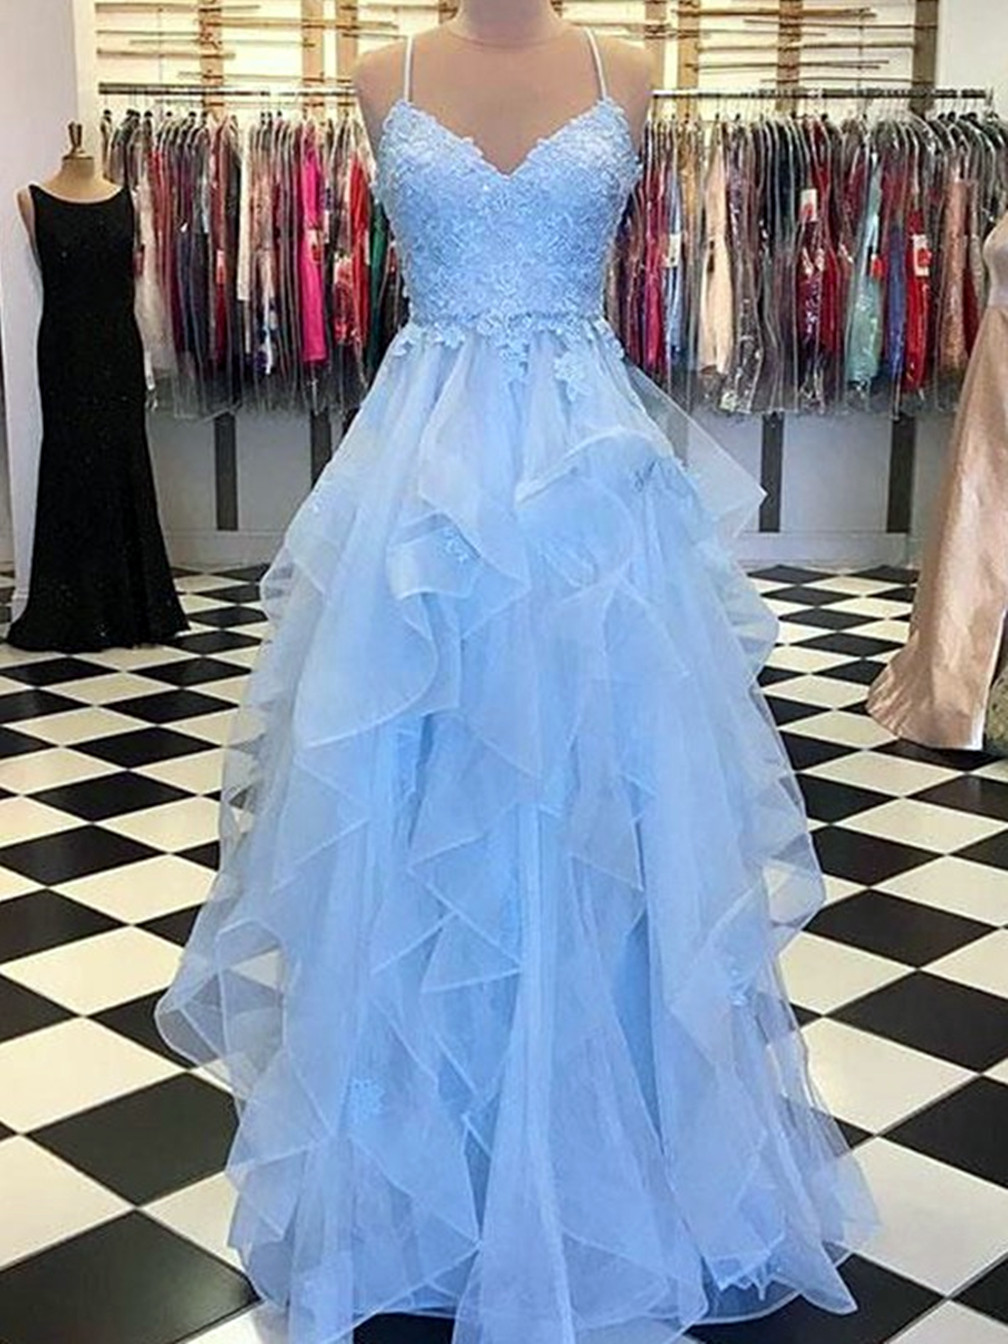 Women A-line/princess Lace Prom Dresses Long Spaghetti Straps Appliques Evening Party Gowns Sleeveless Formal Dress Yp082